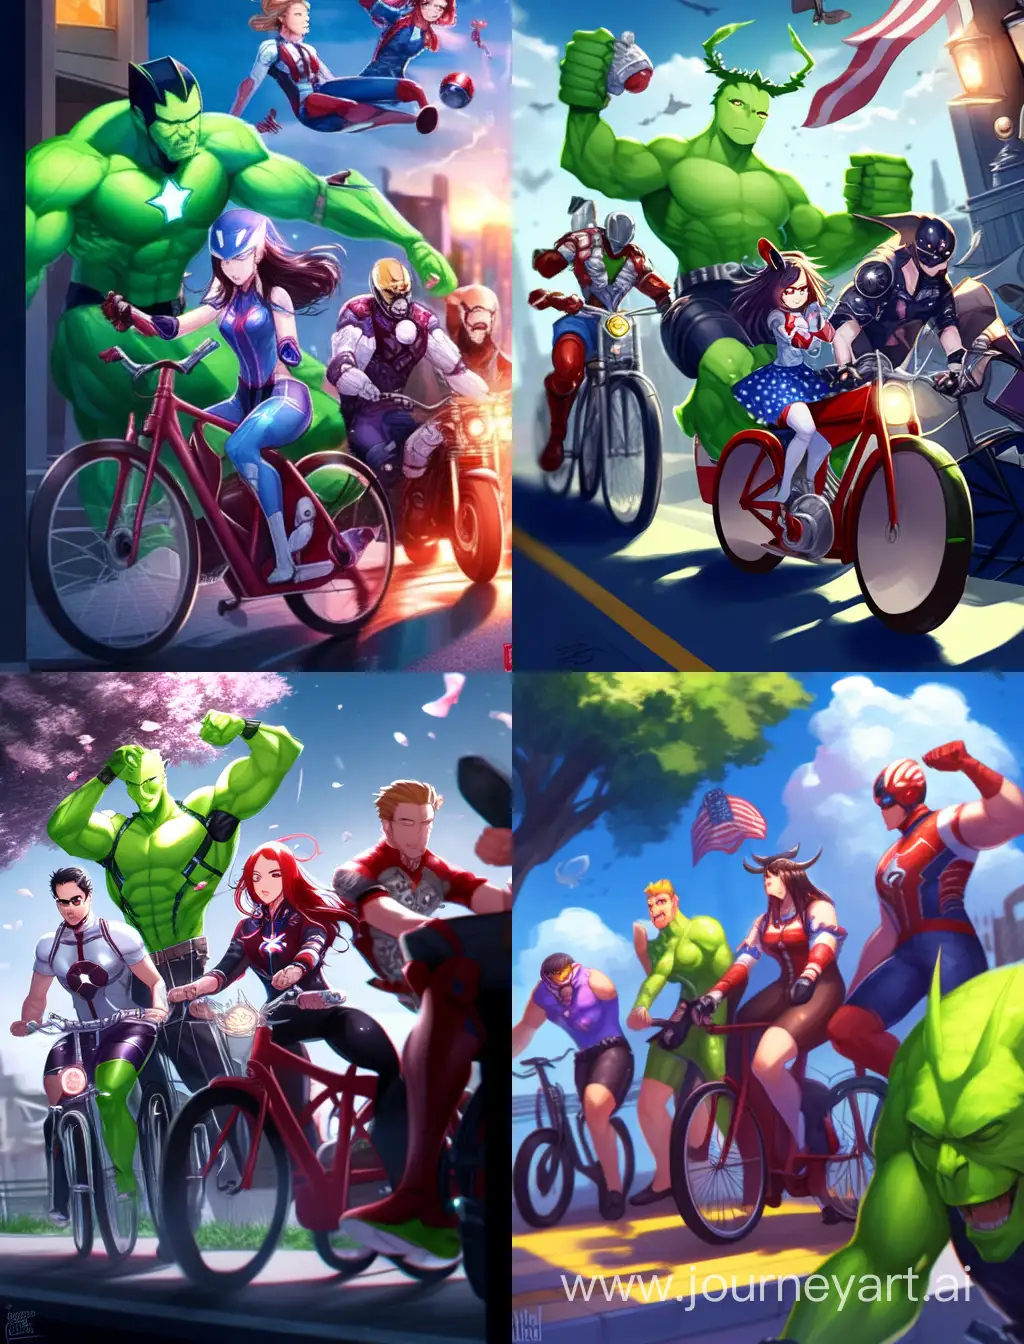 “Hulk”,“Iron Man”,“Captain America”, “Loki” ,“The Scarlet Witch” “Black Widow” .On bicycles with beer in ha